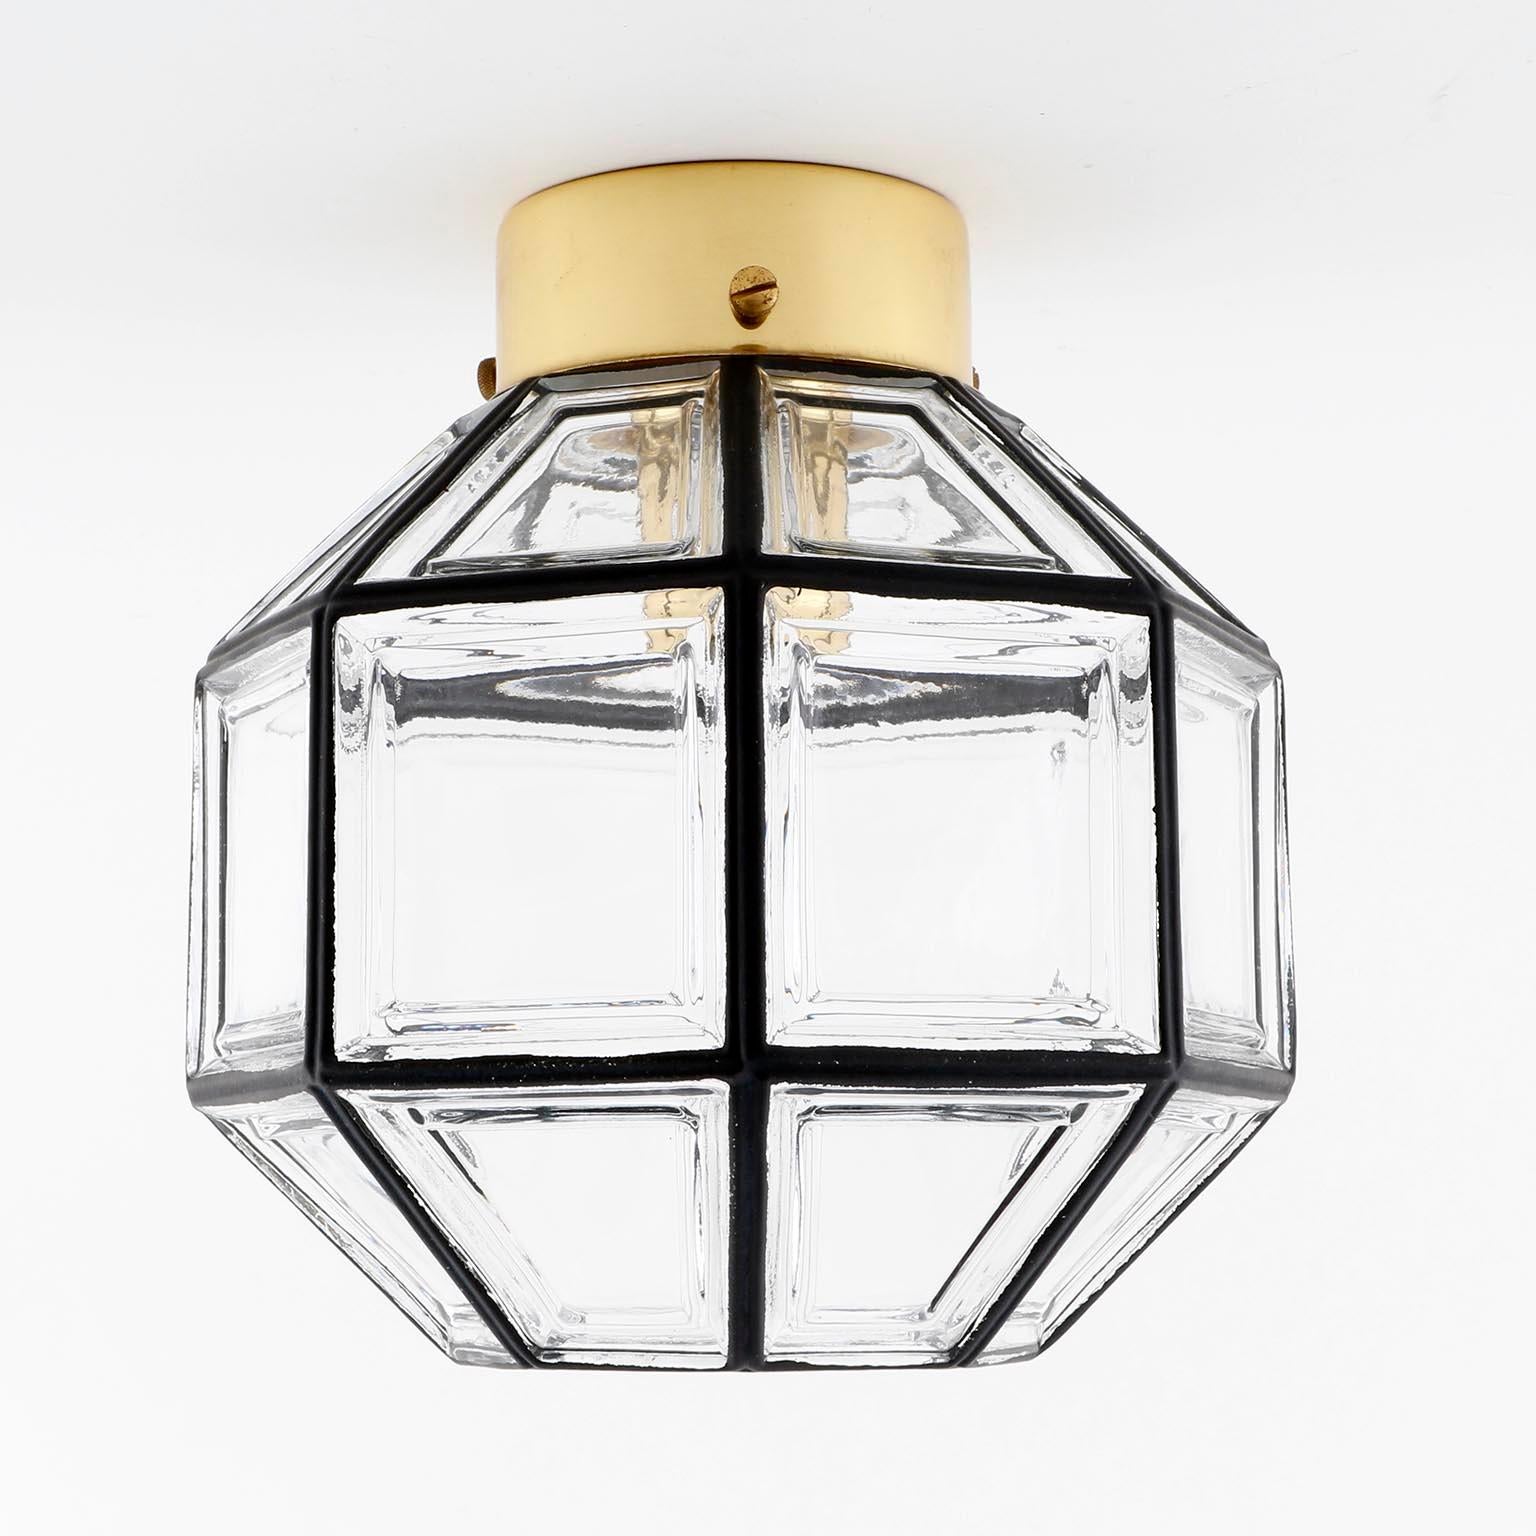 One of three beautiful and unique design 'iron' glass lights by Glashütte Limburg, Germany, manufactured in midcentury, circa 1970 (late 1960s or early 1970s).
It can be used as wall or ceiling lamp. Black iron circles inlaid in thick clear glass.